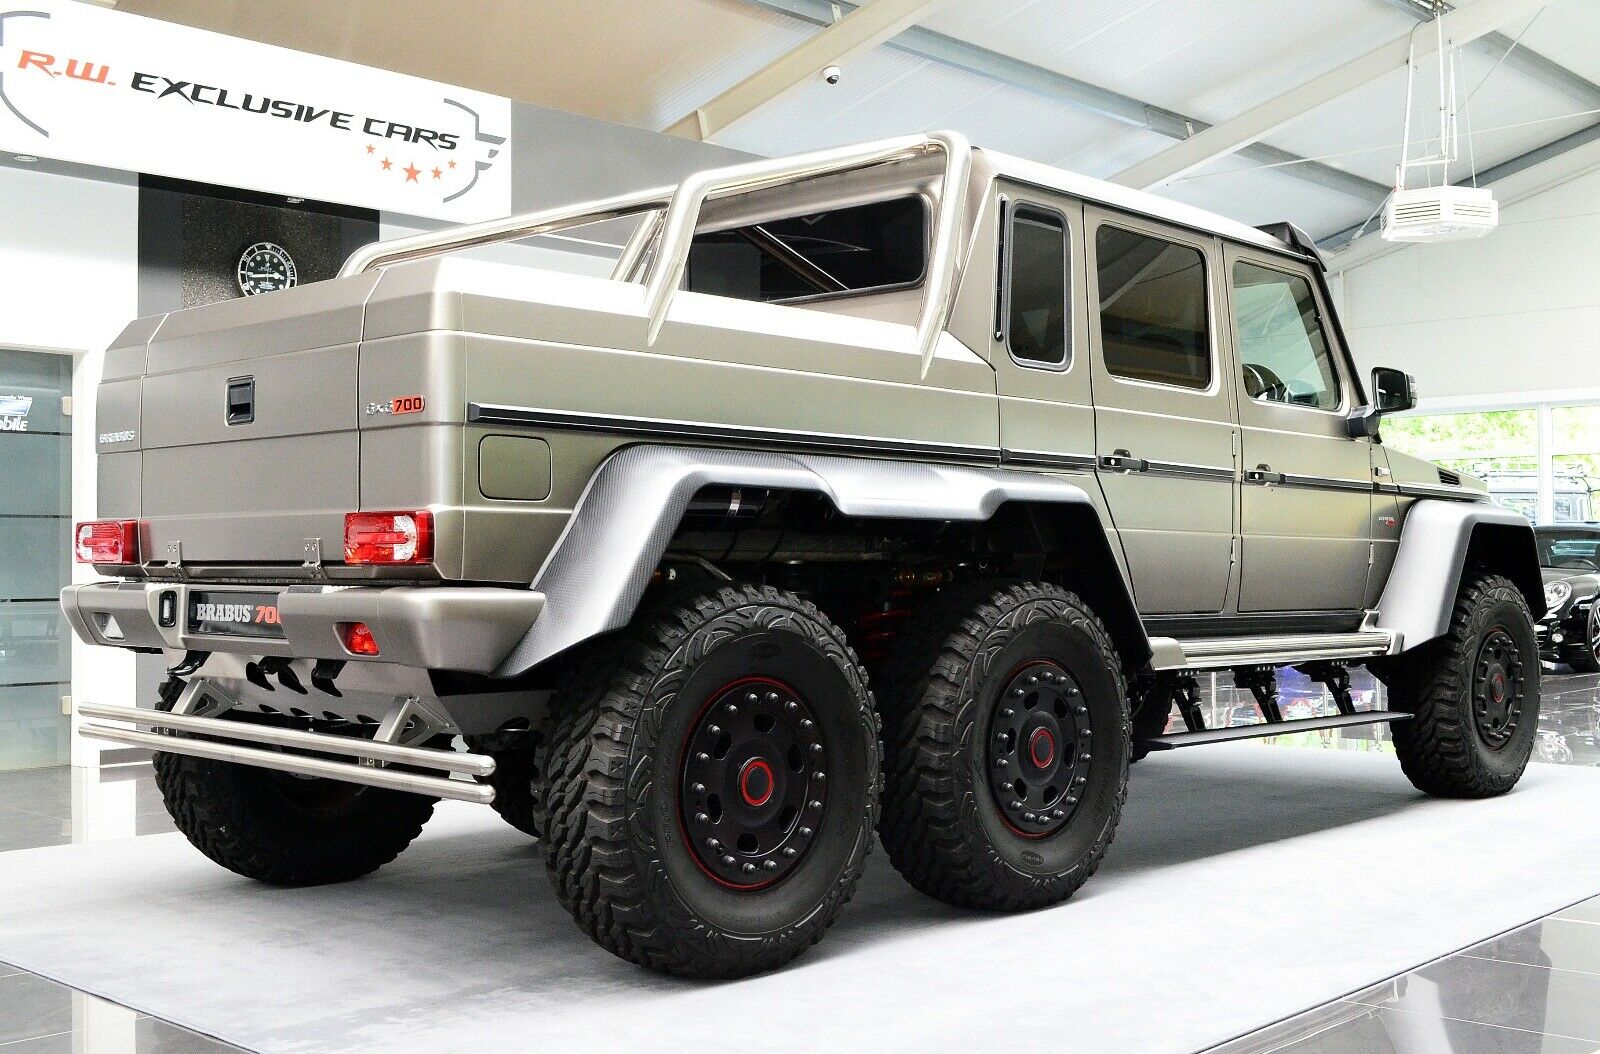 Mercedes Benz G 63 Amg 6x6 Brabus700 Limited Edition 1of15 Luxury Pulse Cars Germany For Sale On Luxurypulse